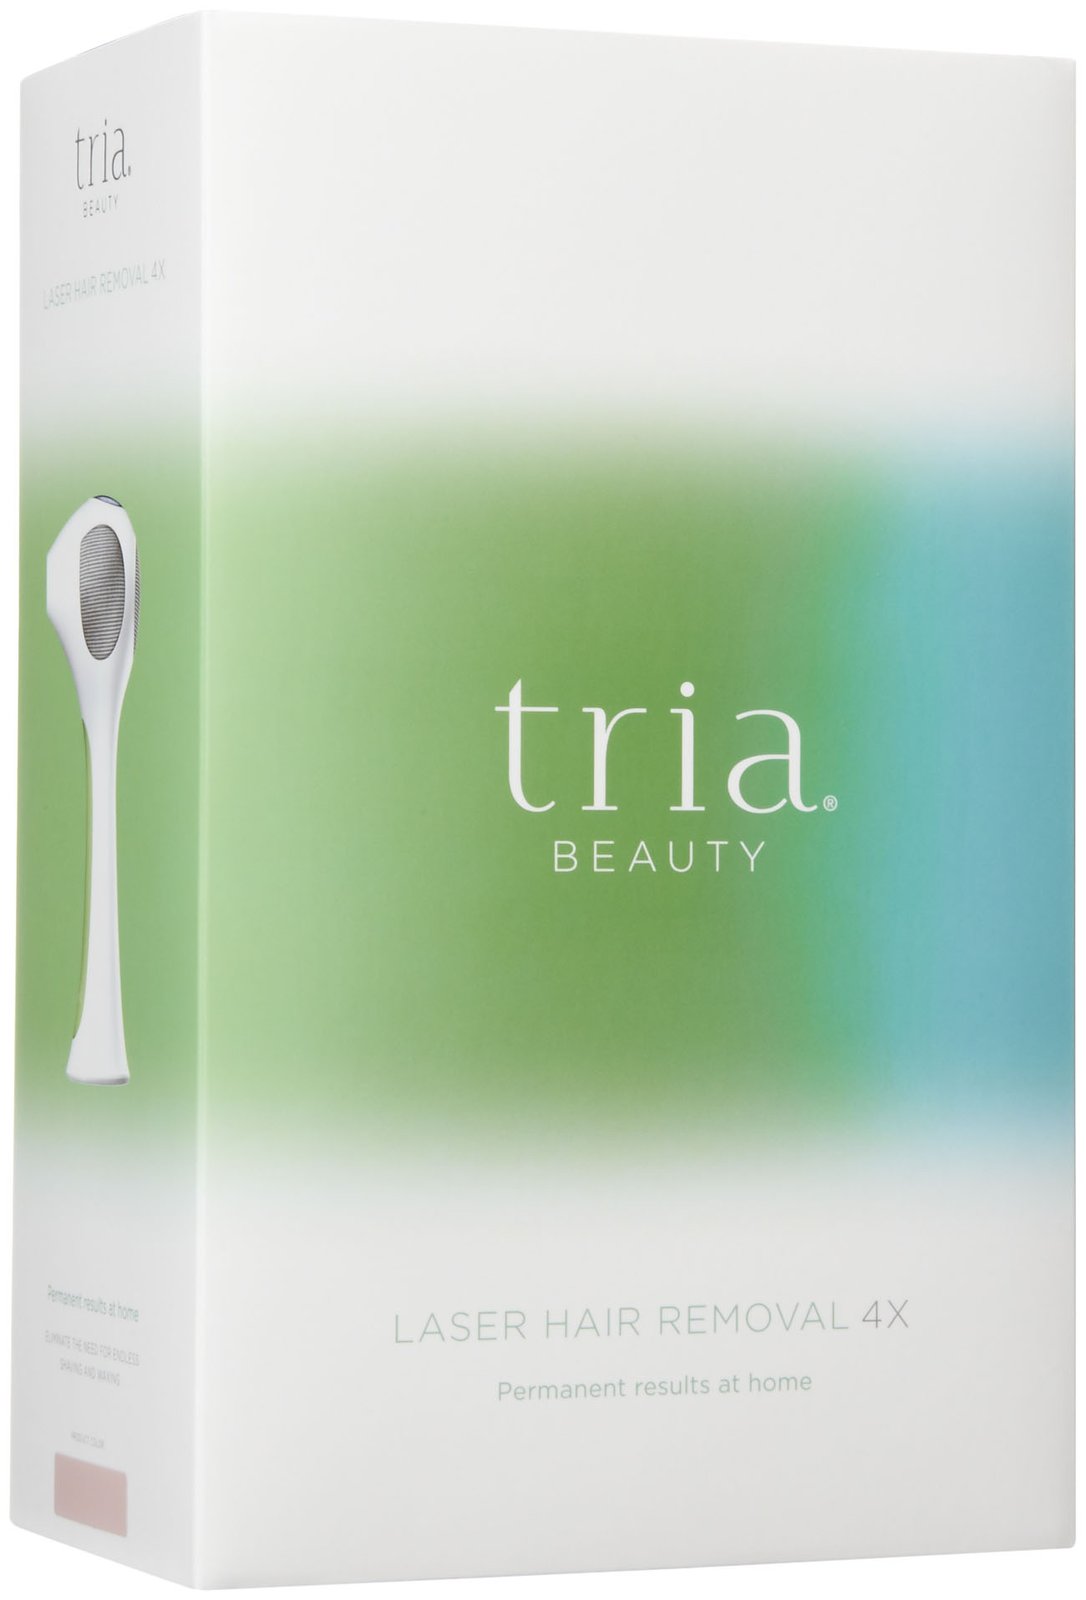 Tria Beauty At Home Laser Hair Removal PCOS Diva